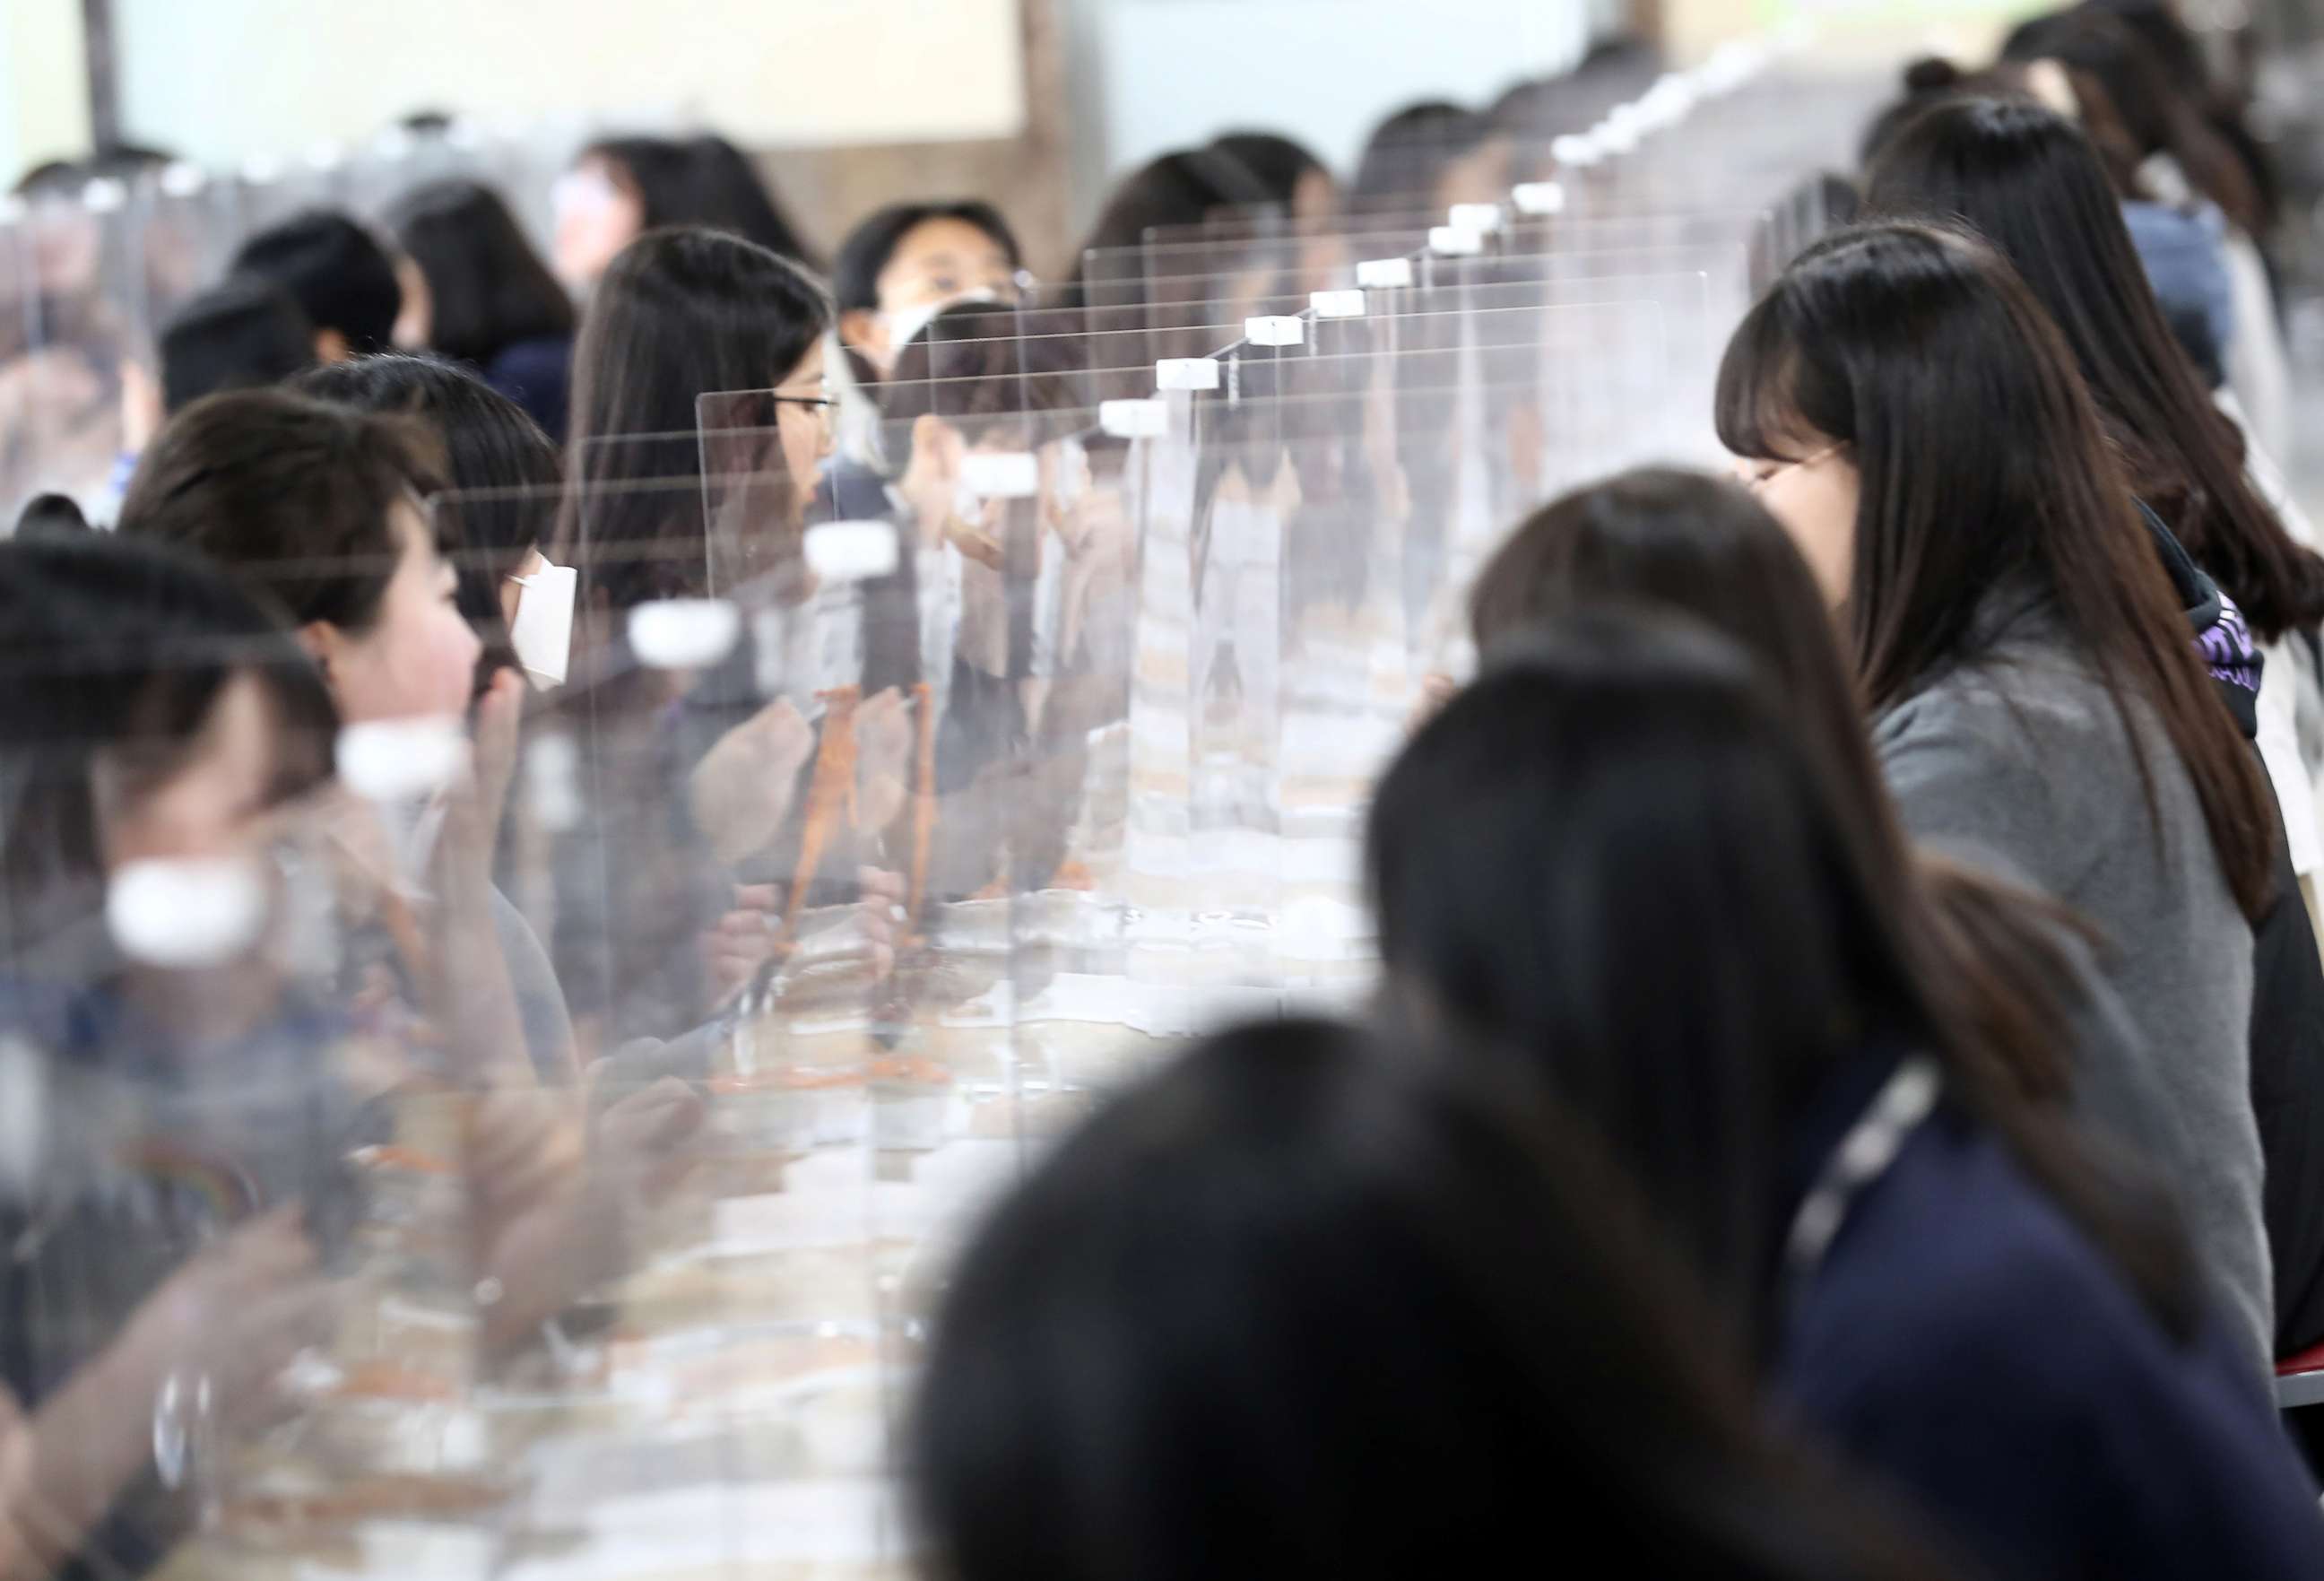 PHOTO: High school students eat lunch at a cafeteria with plastic screens on the table in Daejeon, South Korea, May 20, 2020.